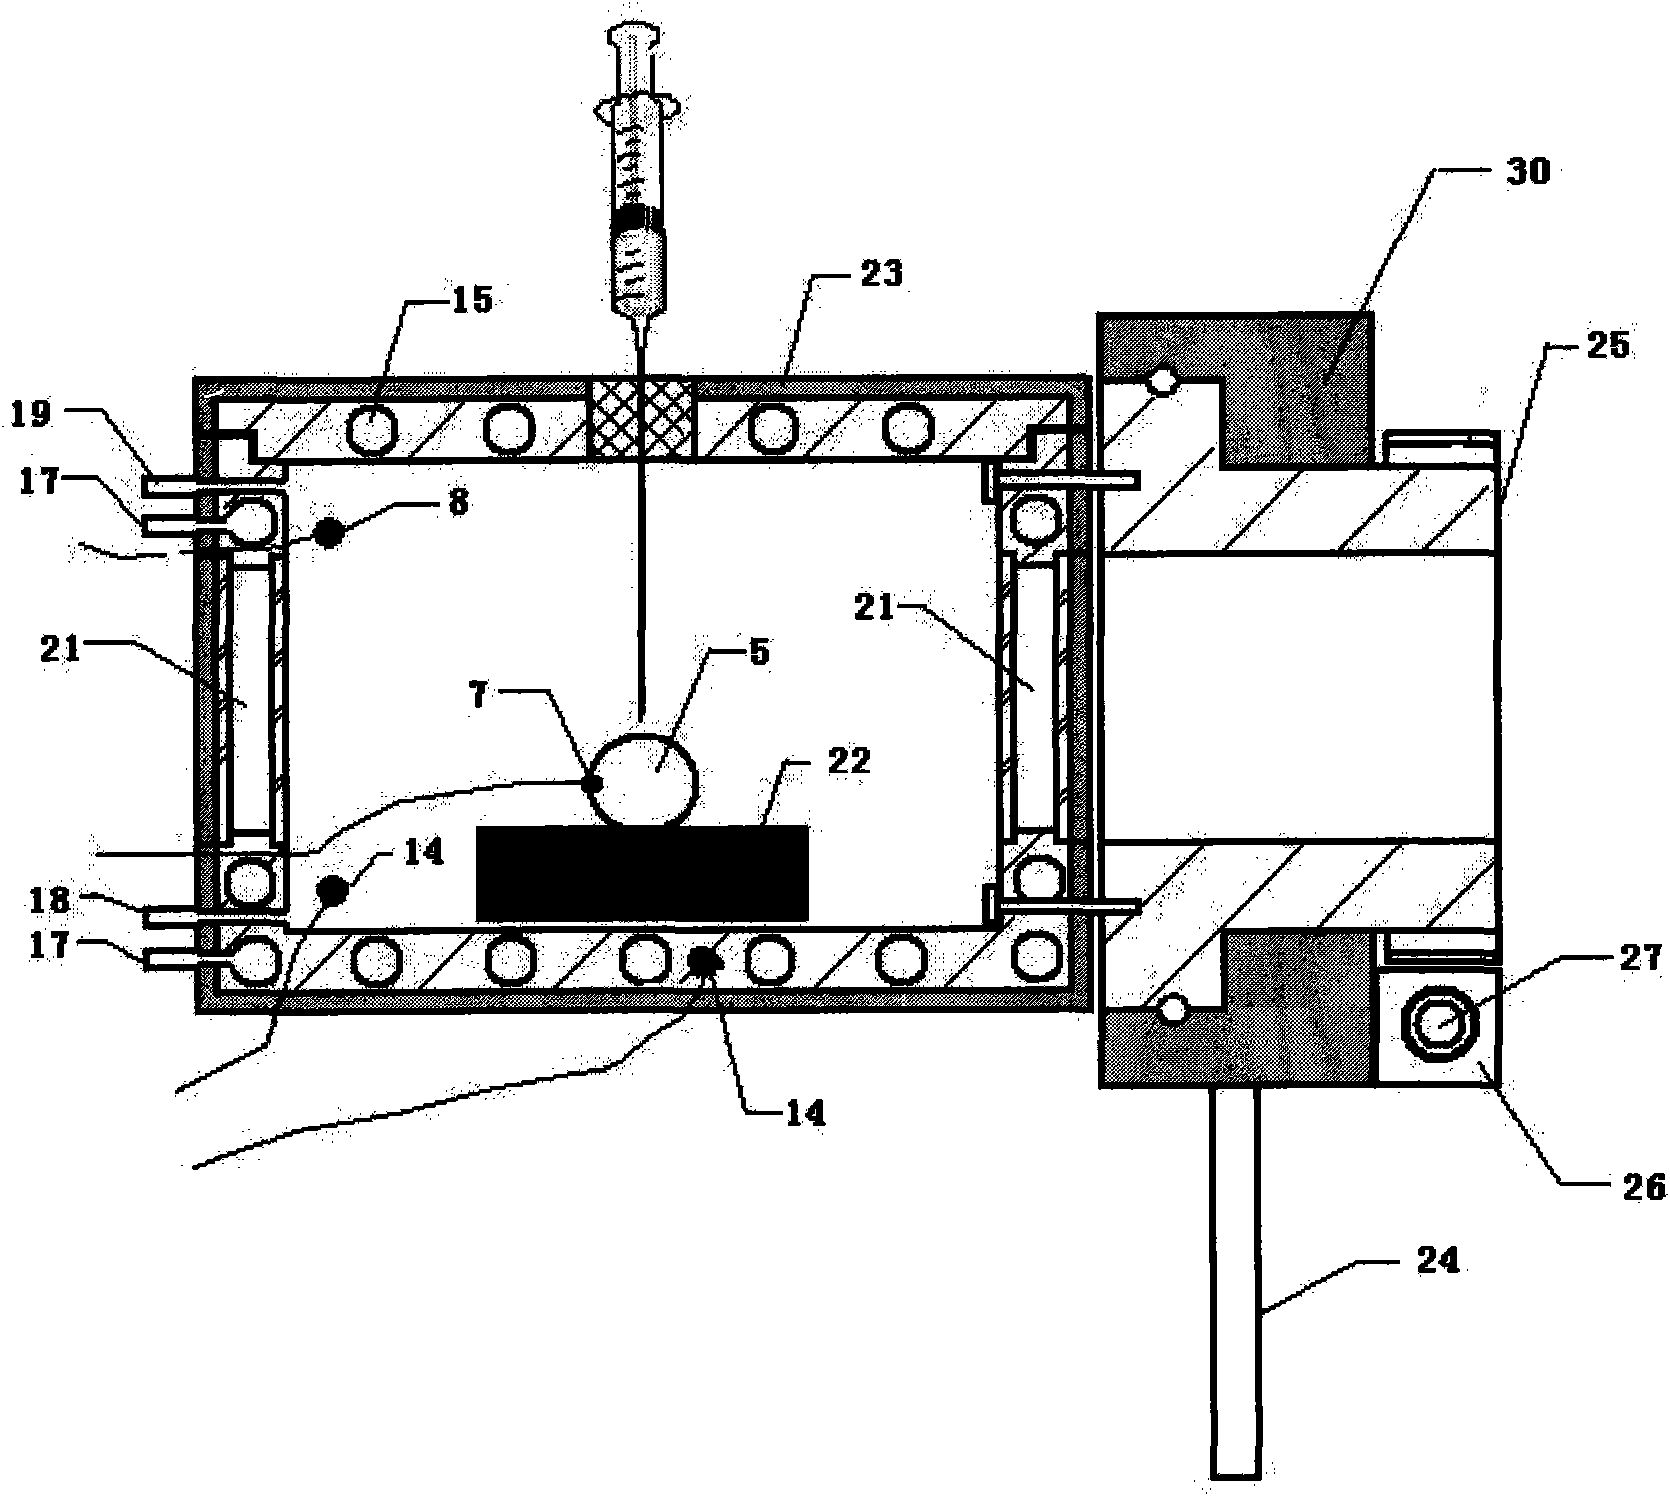 Device for synchronously measuring temperature and roll angle of droplet by controlling temperature and humidity